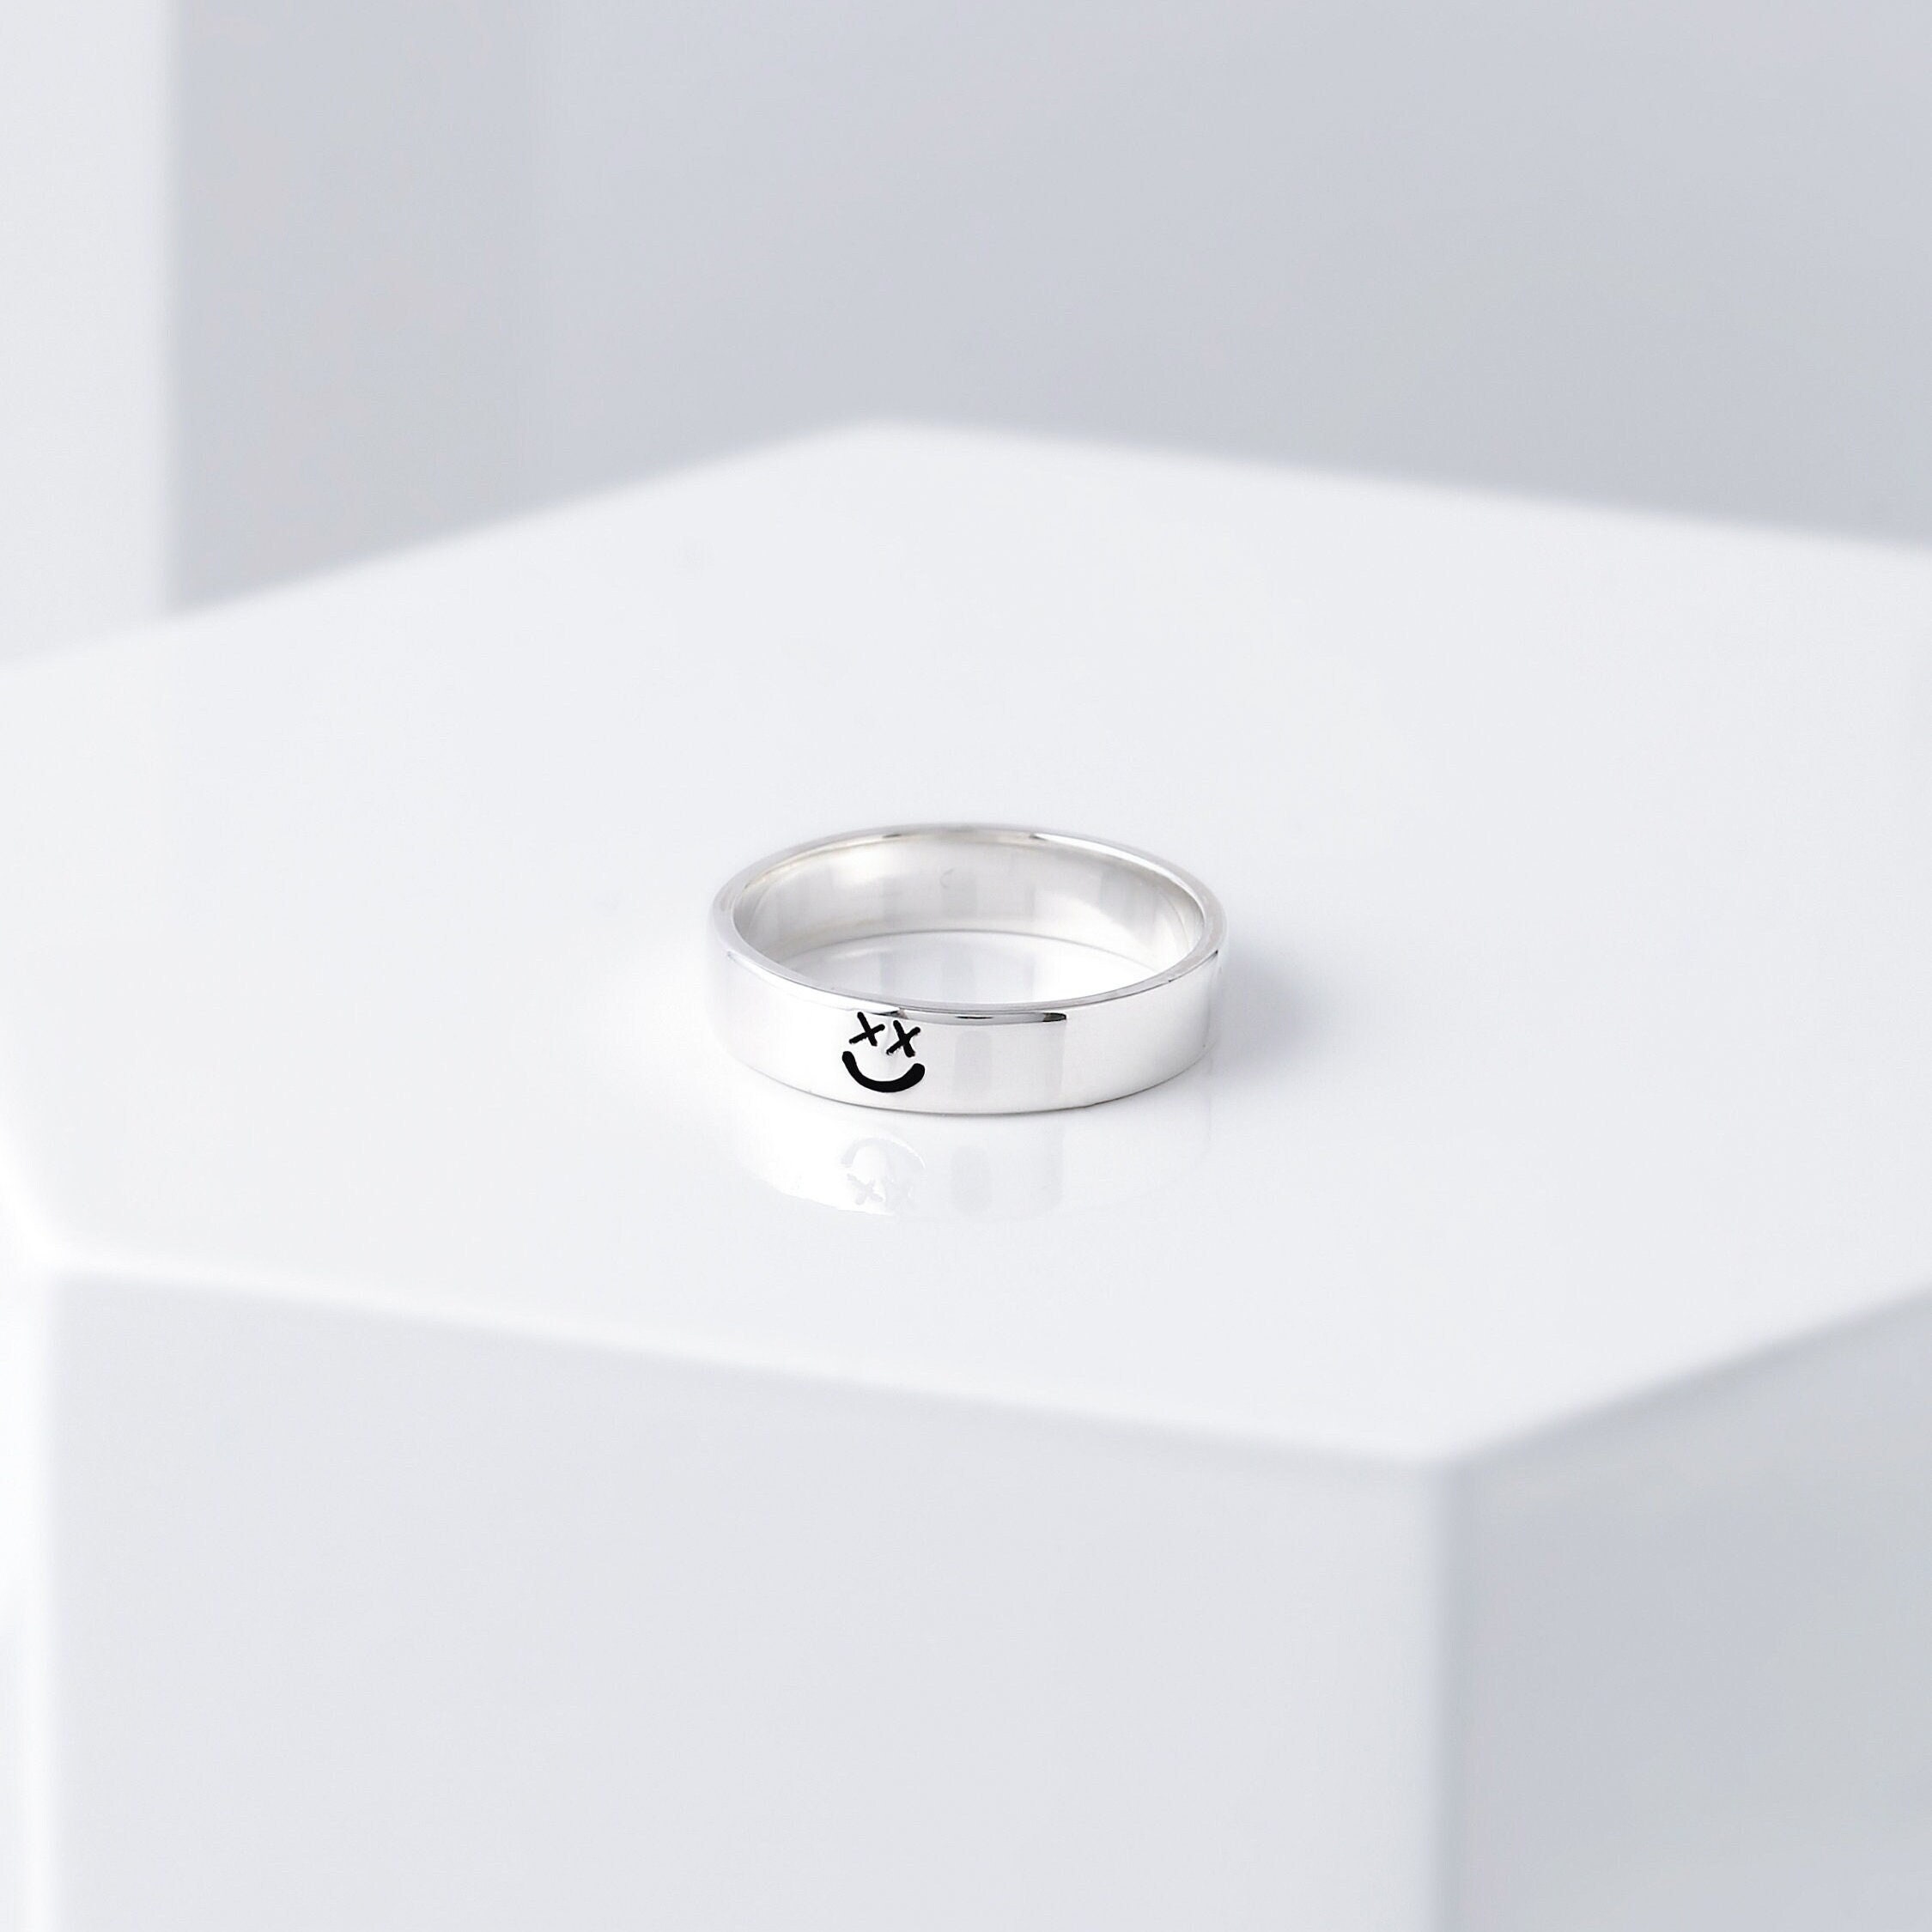 XX Smiley Face Ring Louis Tomlinson Ring Only for the 